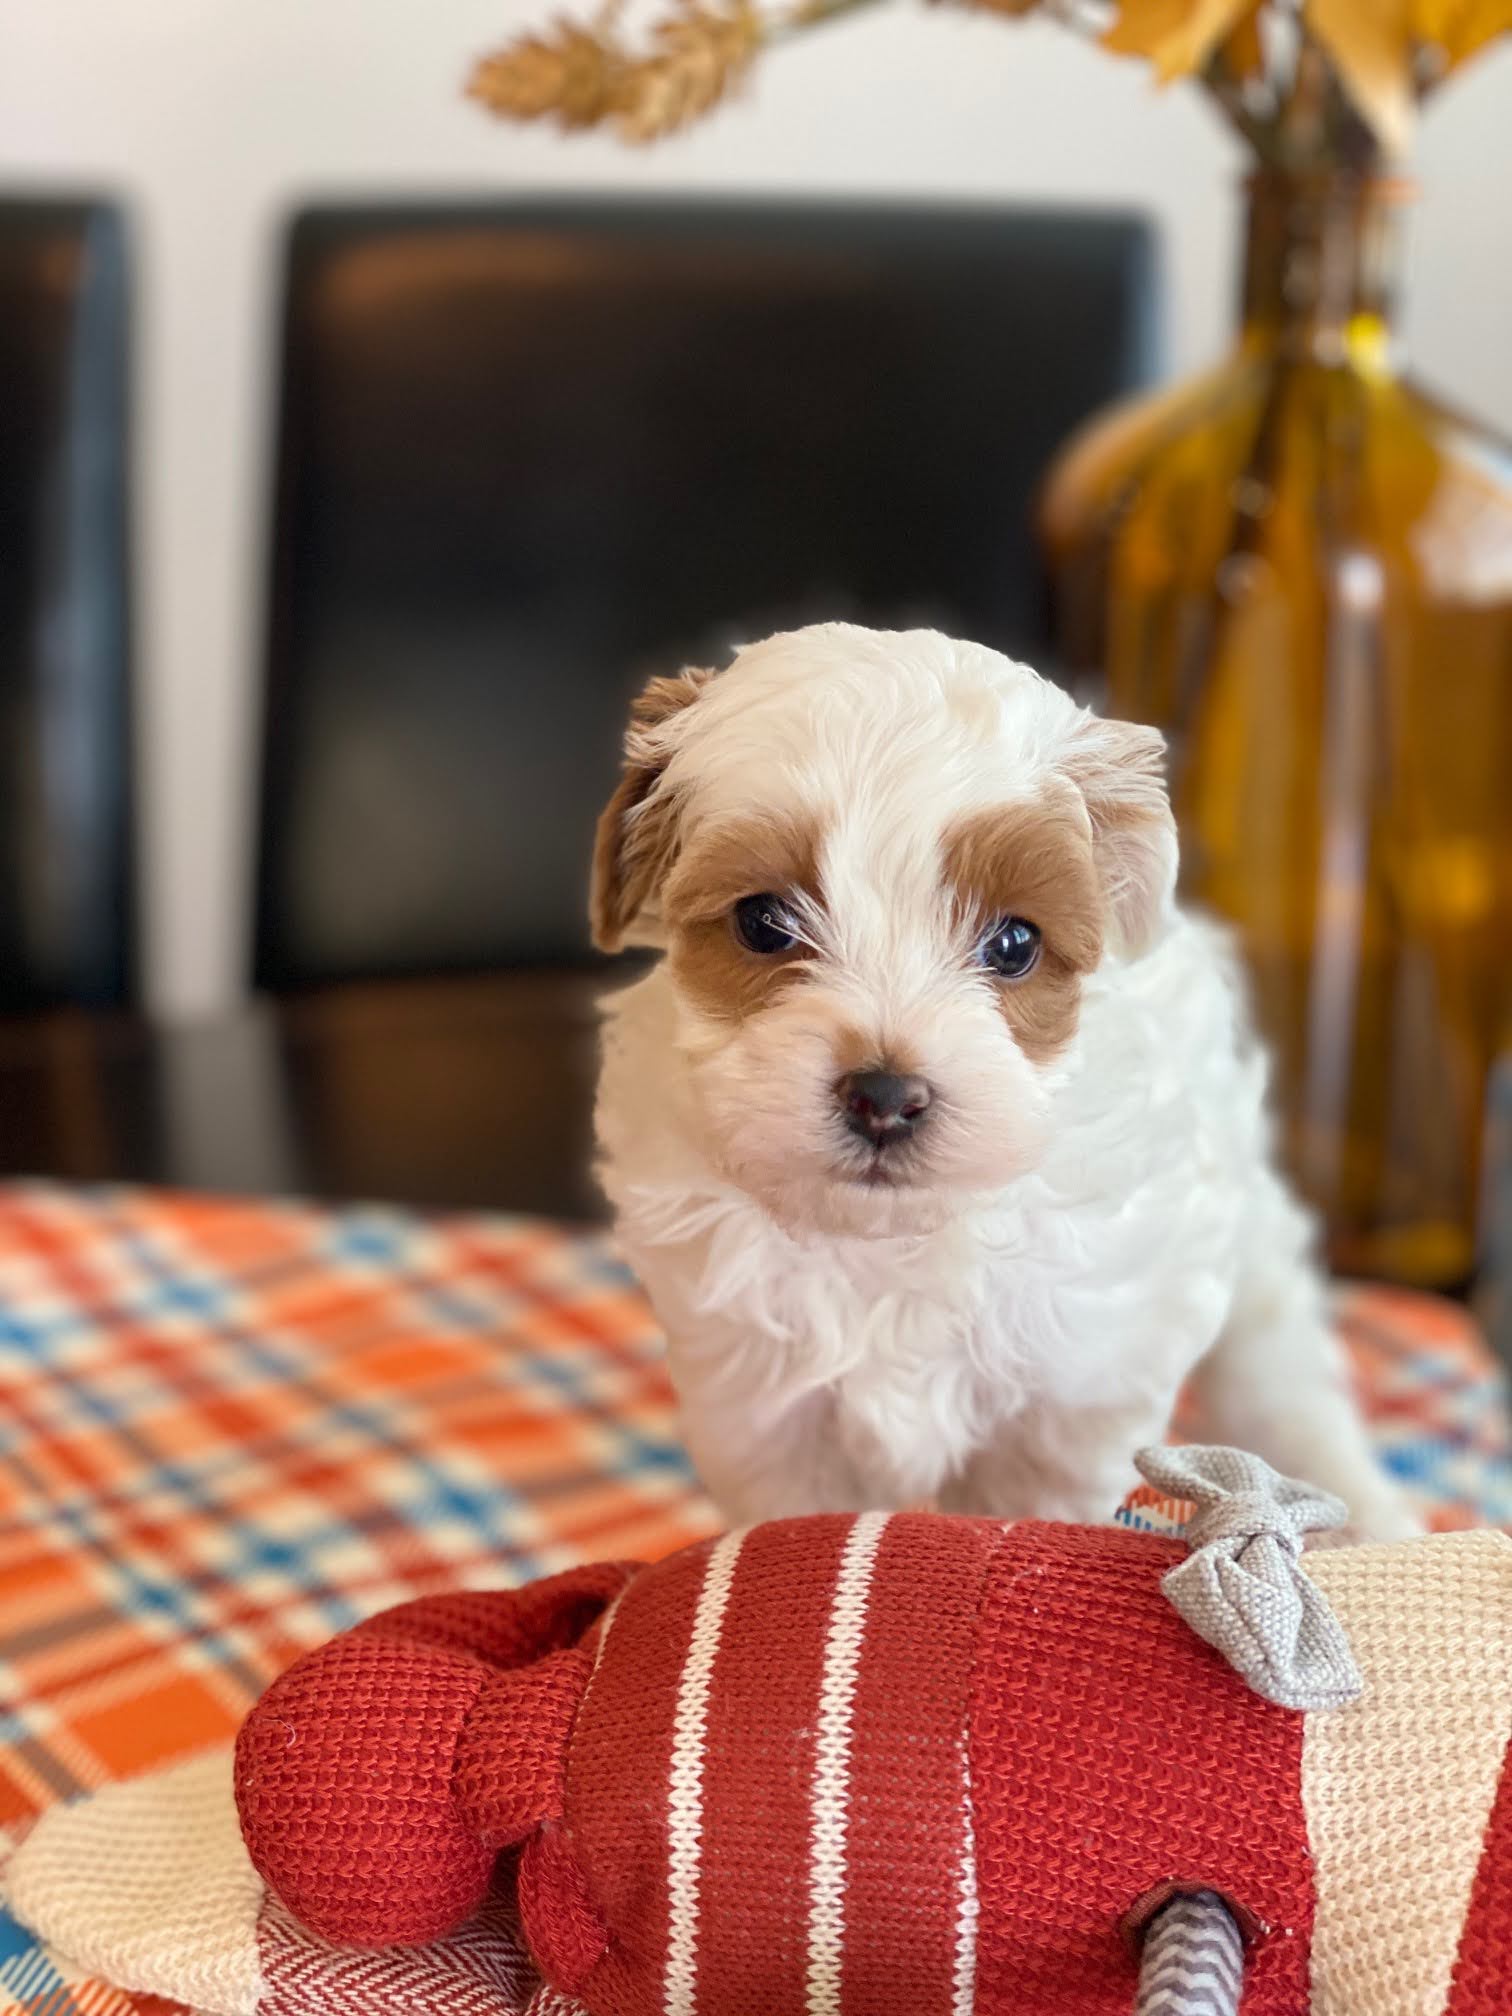 A small white dog calmly seated on a blanket adorned with red and white stripes.